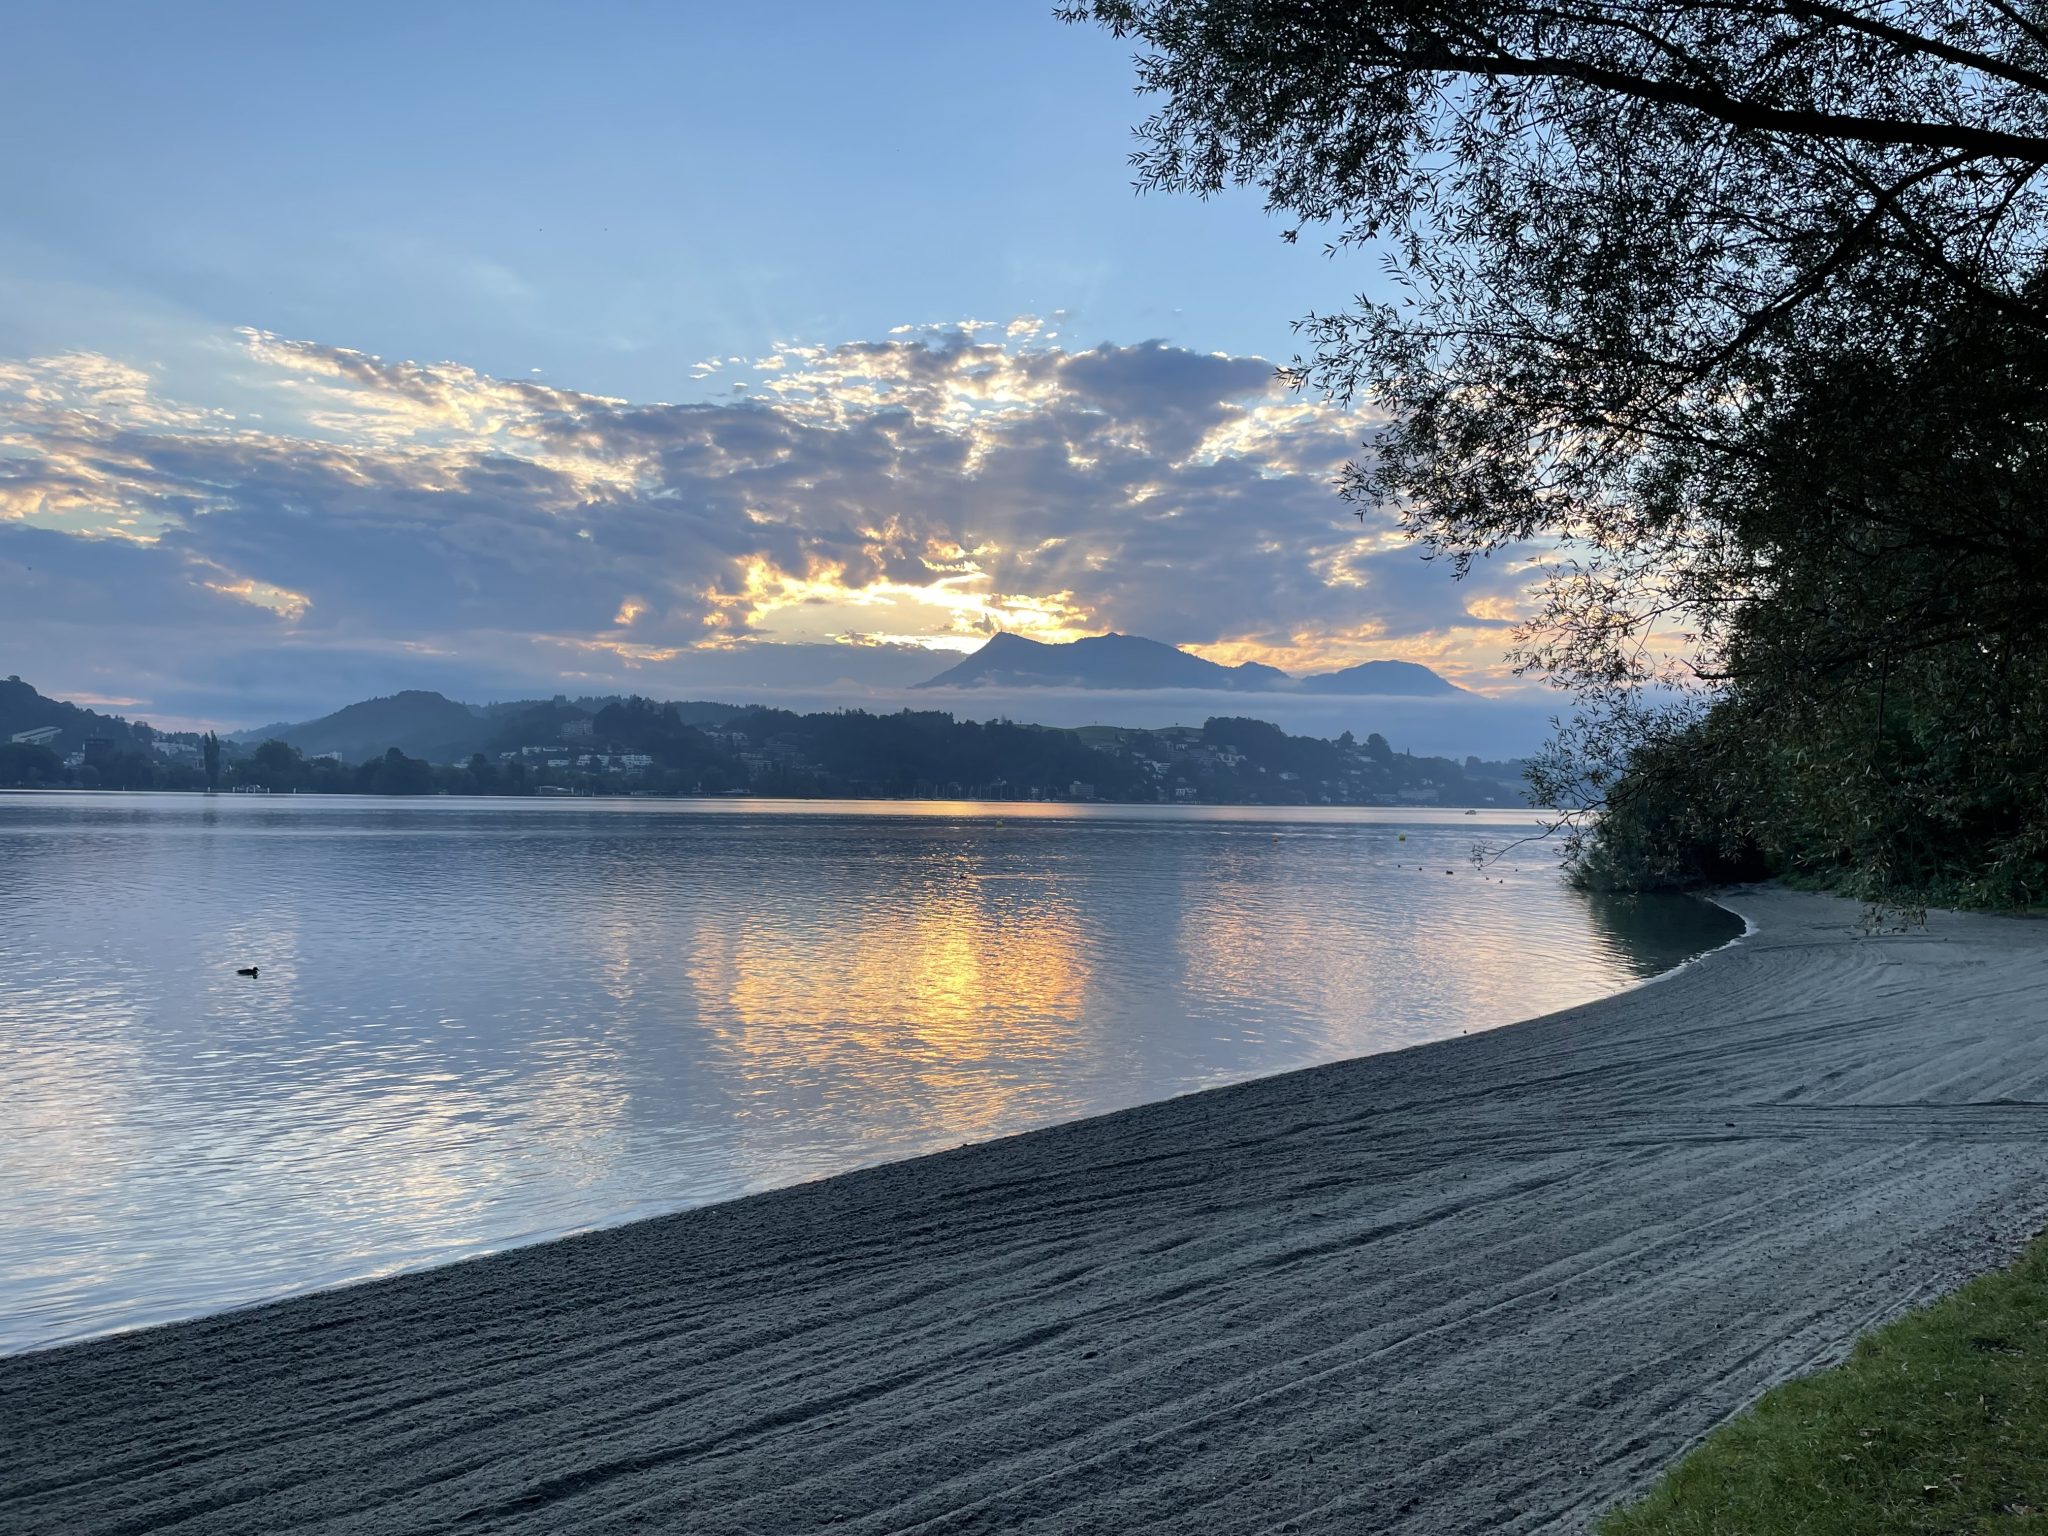 A sunrise seen from a beach in Lucerne, Switzerland. With the mountain "Rigi" in the background.